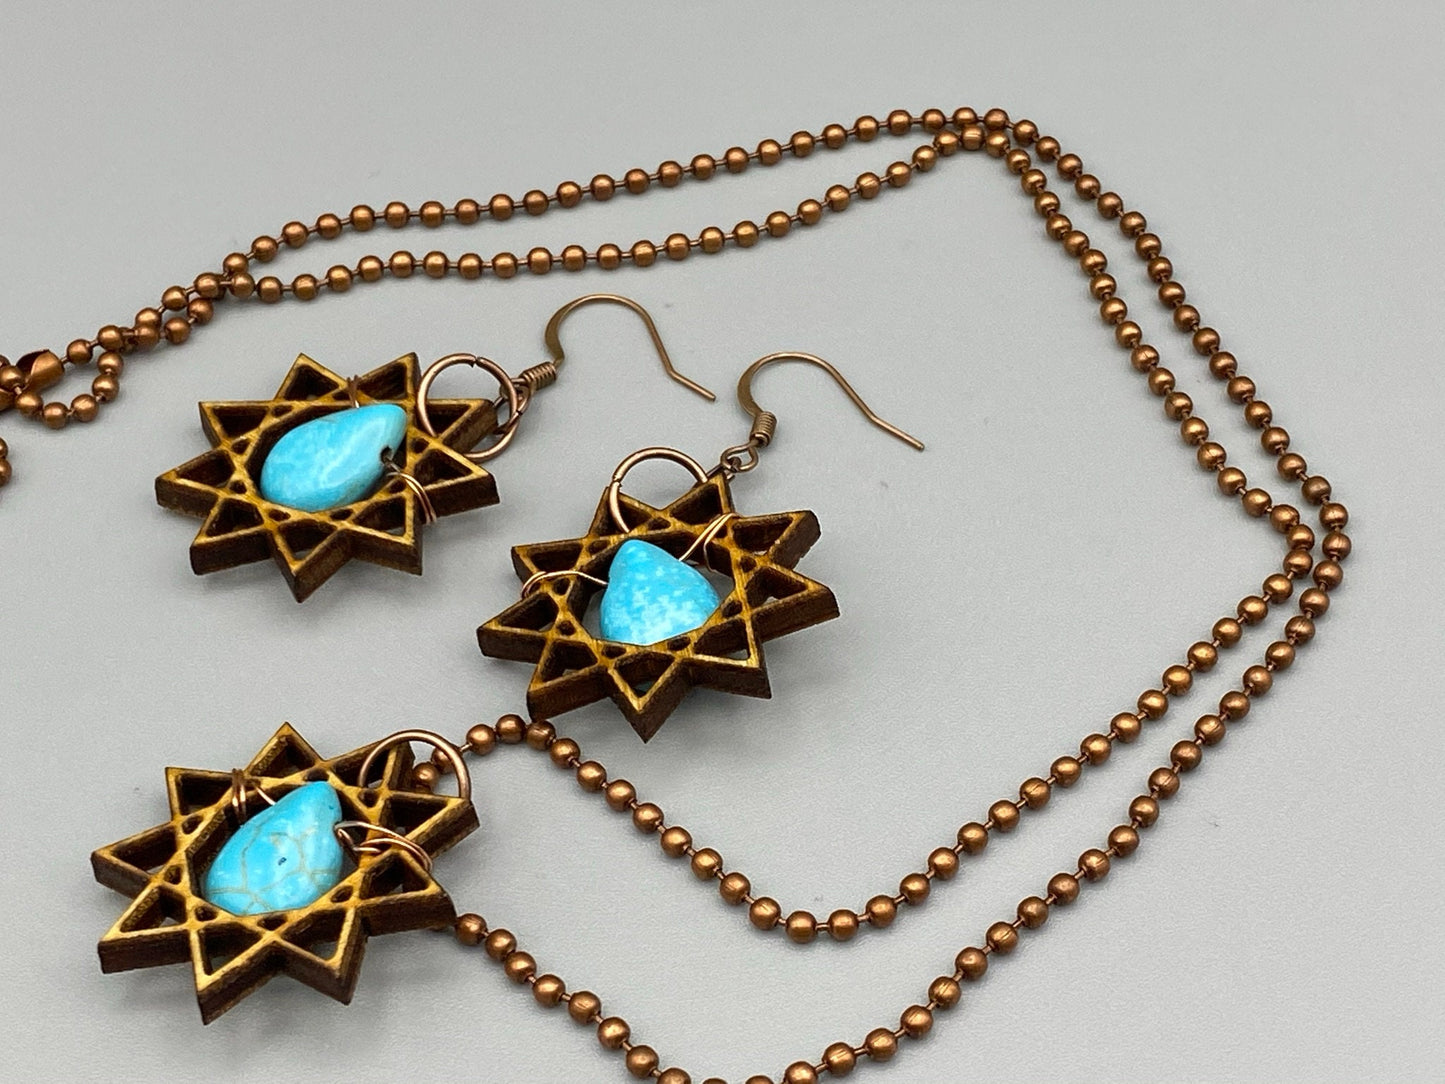 Nine Pointed Star Necklace And Earring Set With Turquoise Beads